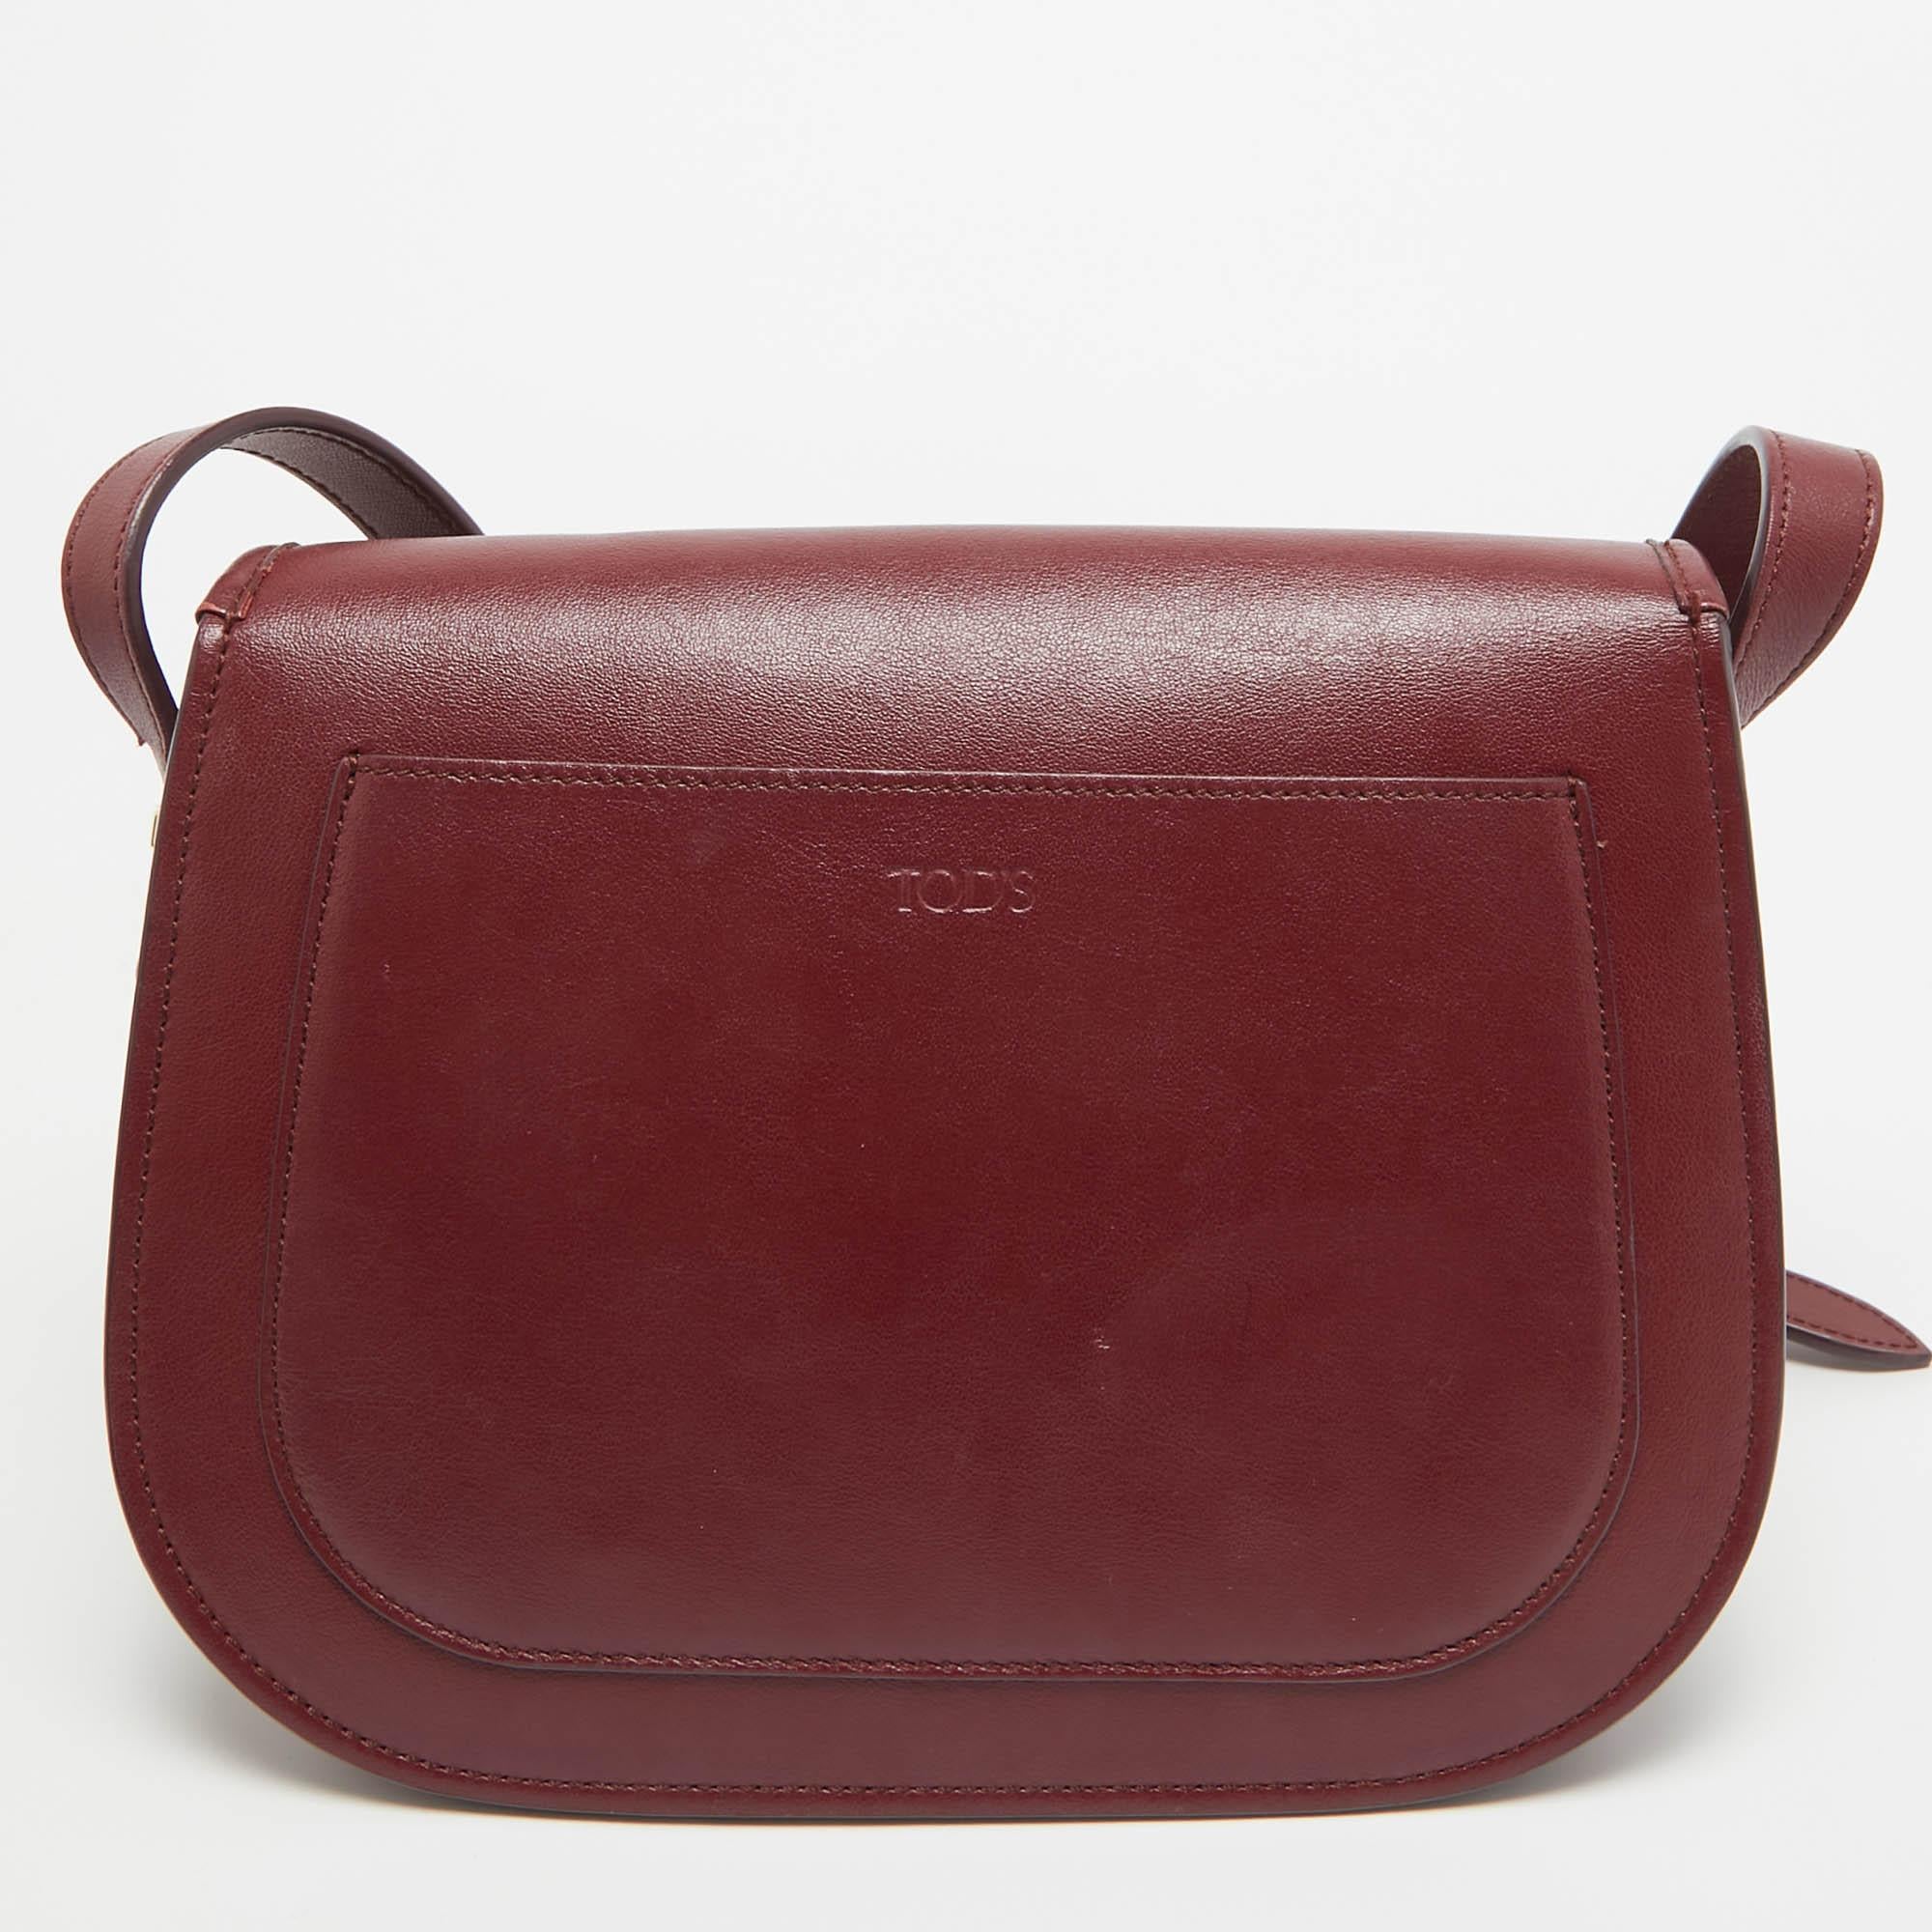 This Tod's crossbody bag is an example of the brand's fine designs that are skillfully crafted to project a classic charm. It is a functional creation with an elevating appeal.

Includes: Original Dustbag

